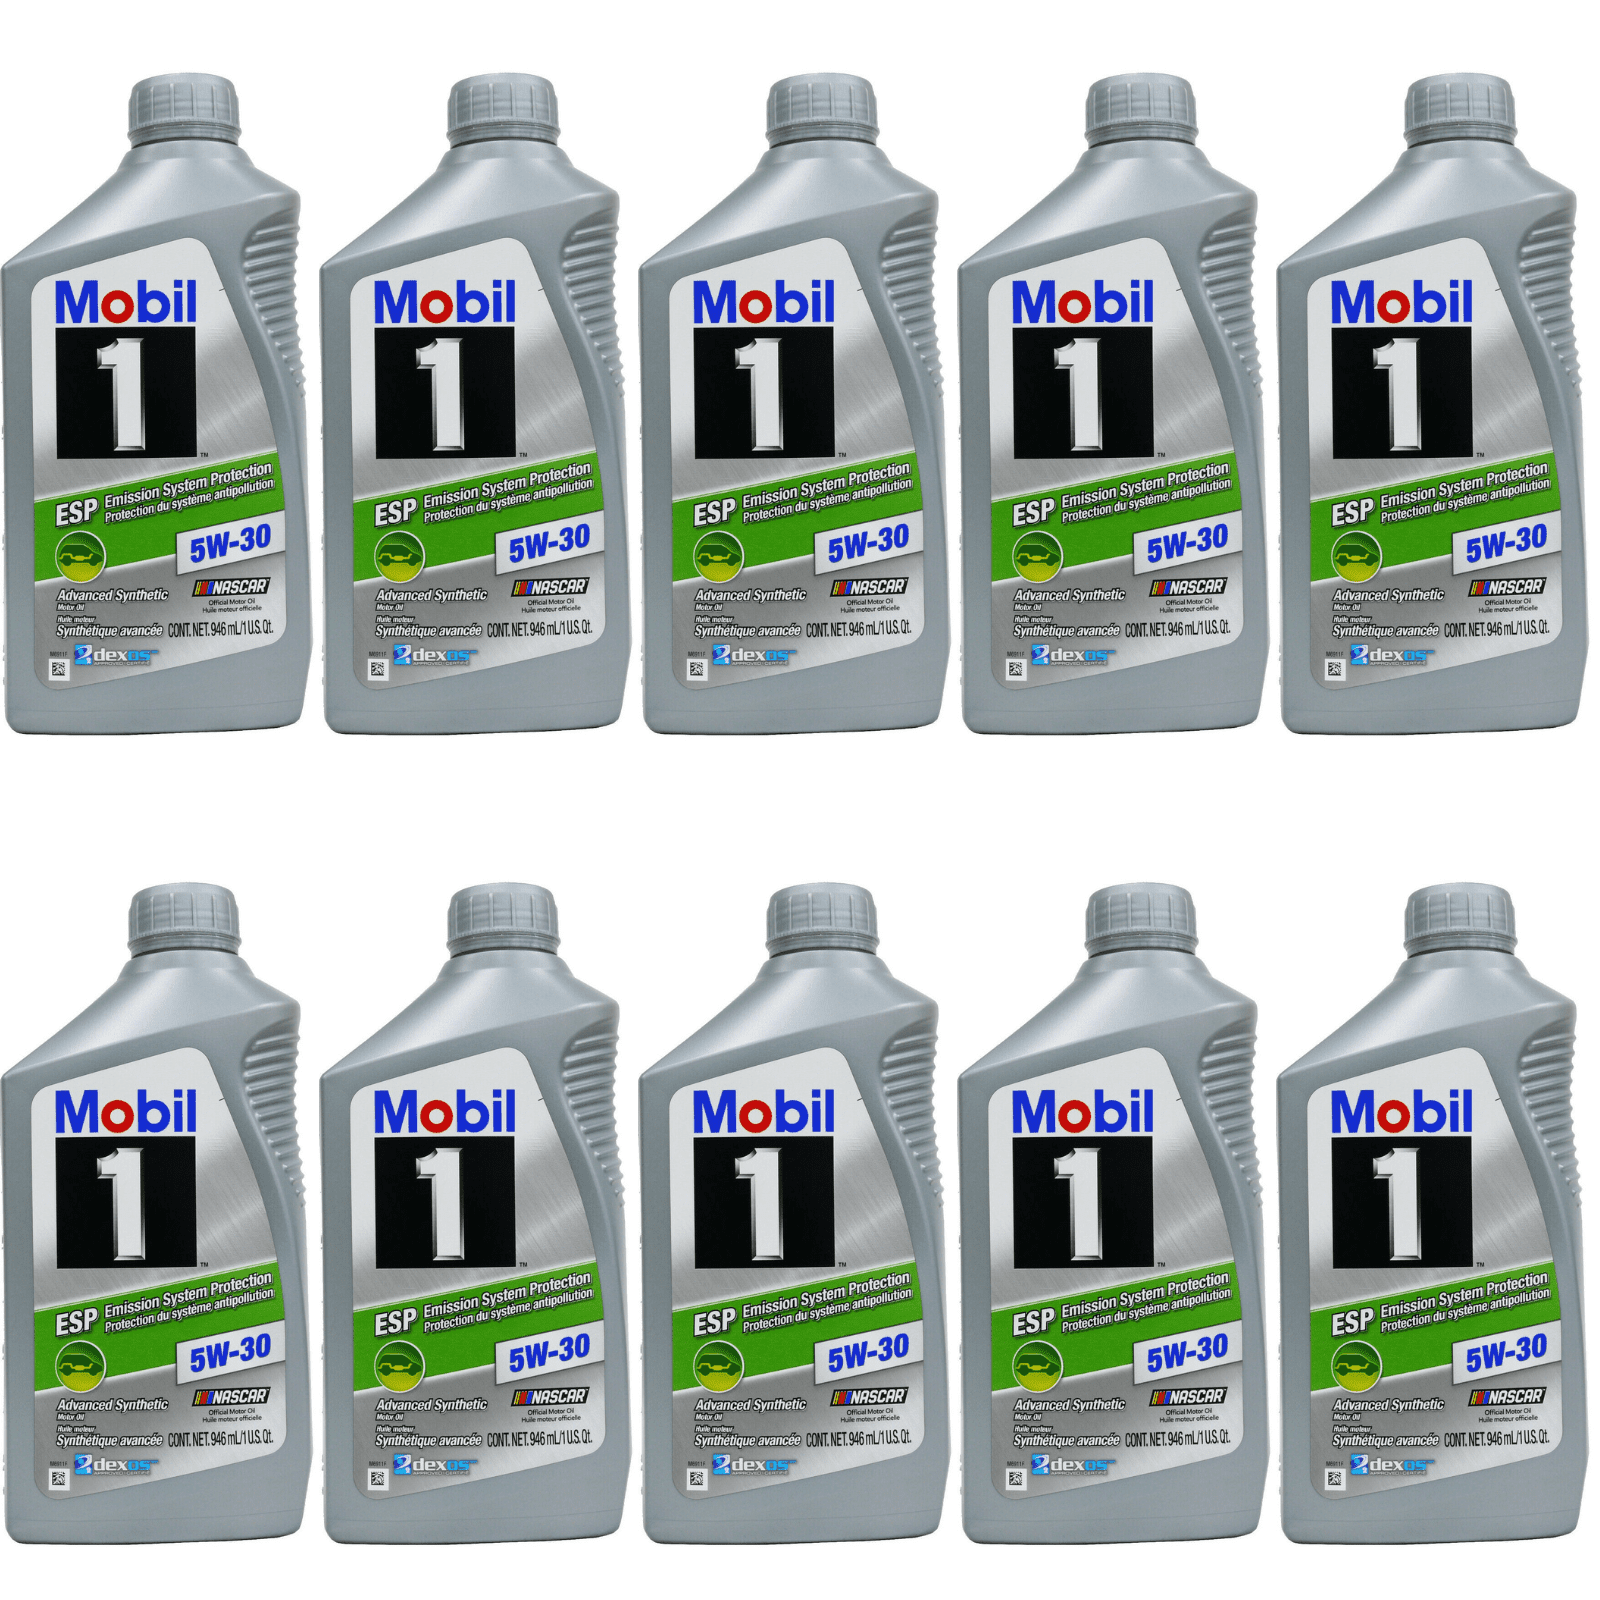 Mobil 1 124044-1 ESP Formula Engine Oil 5W30 sold Individually Pack of 10 